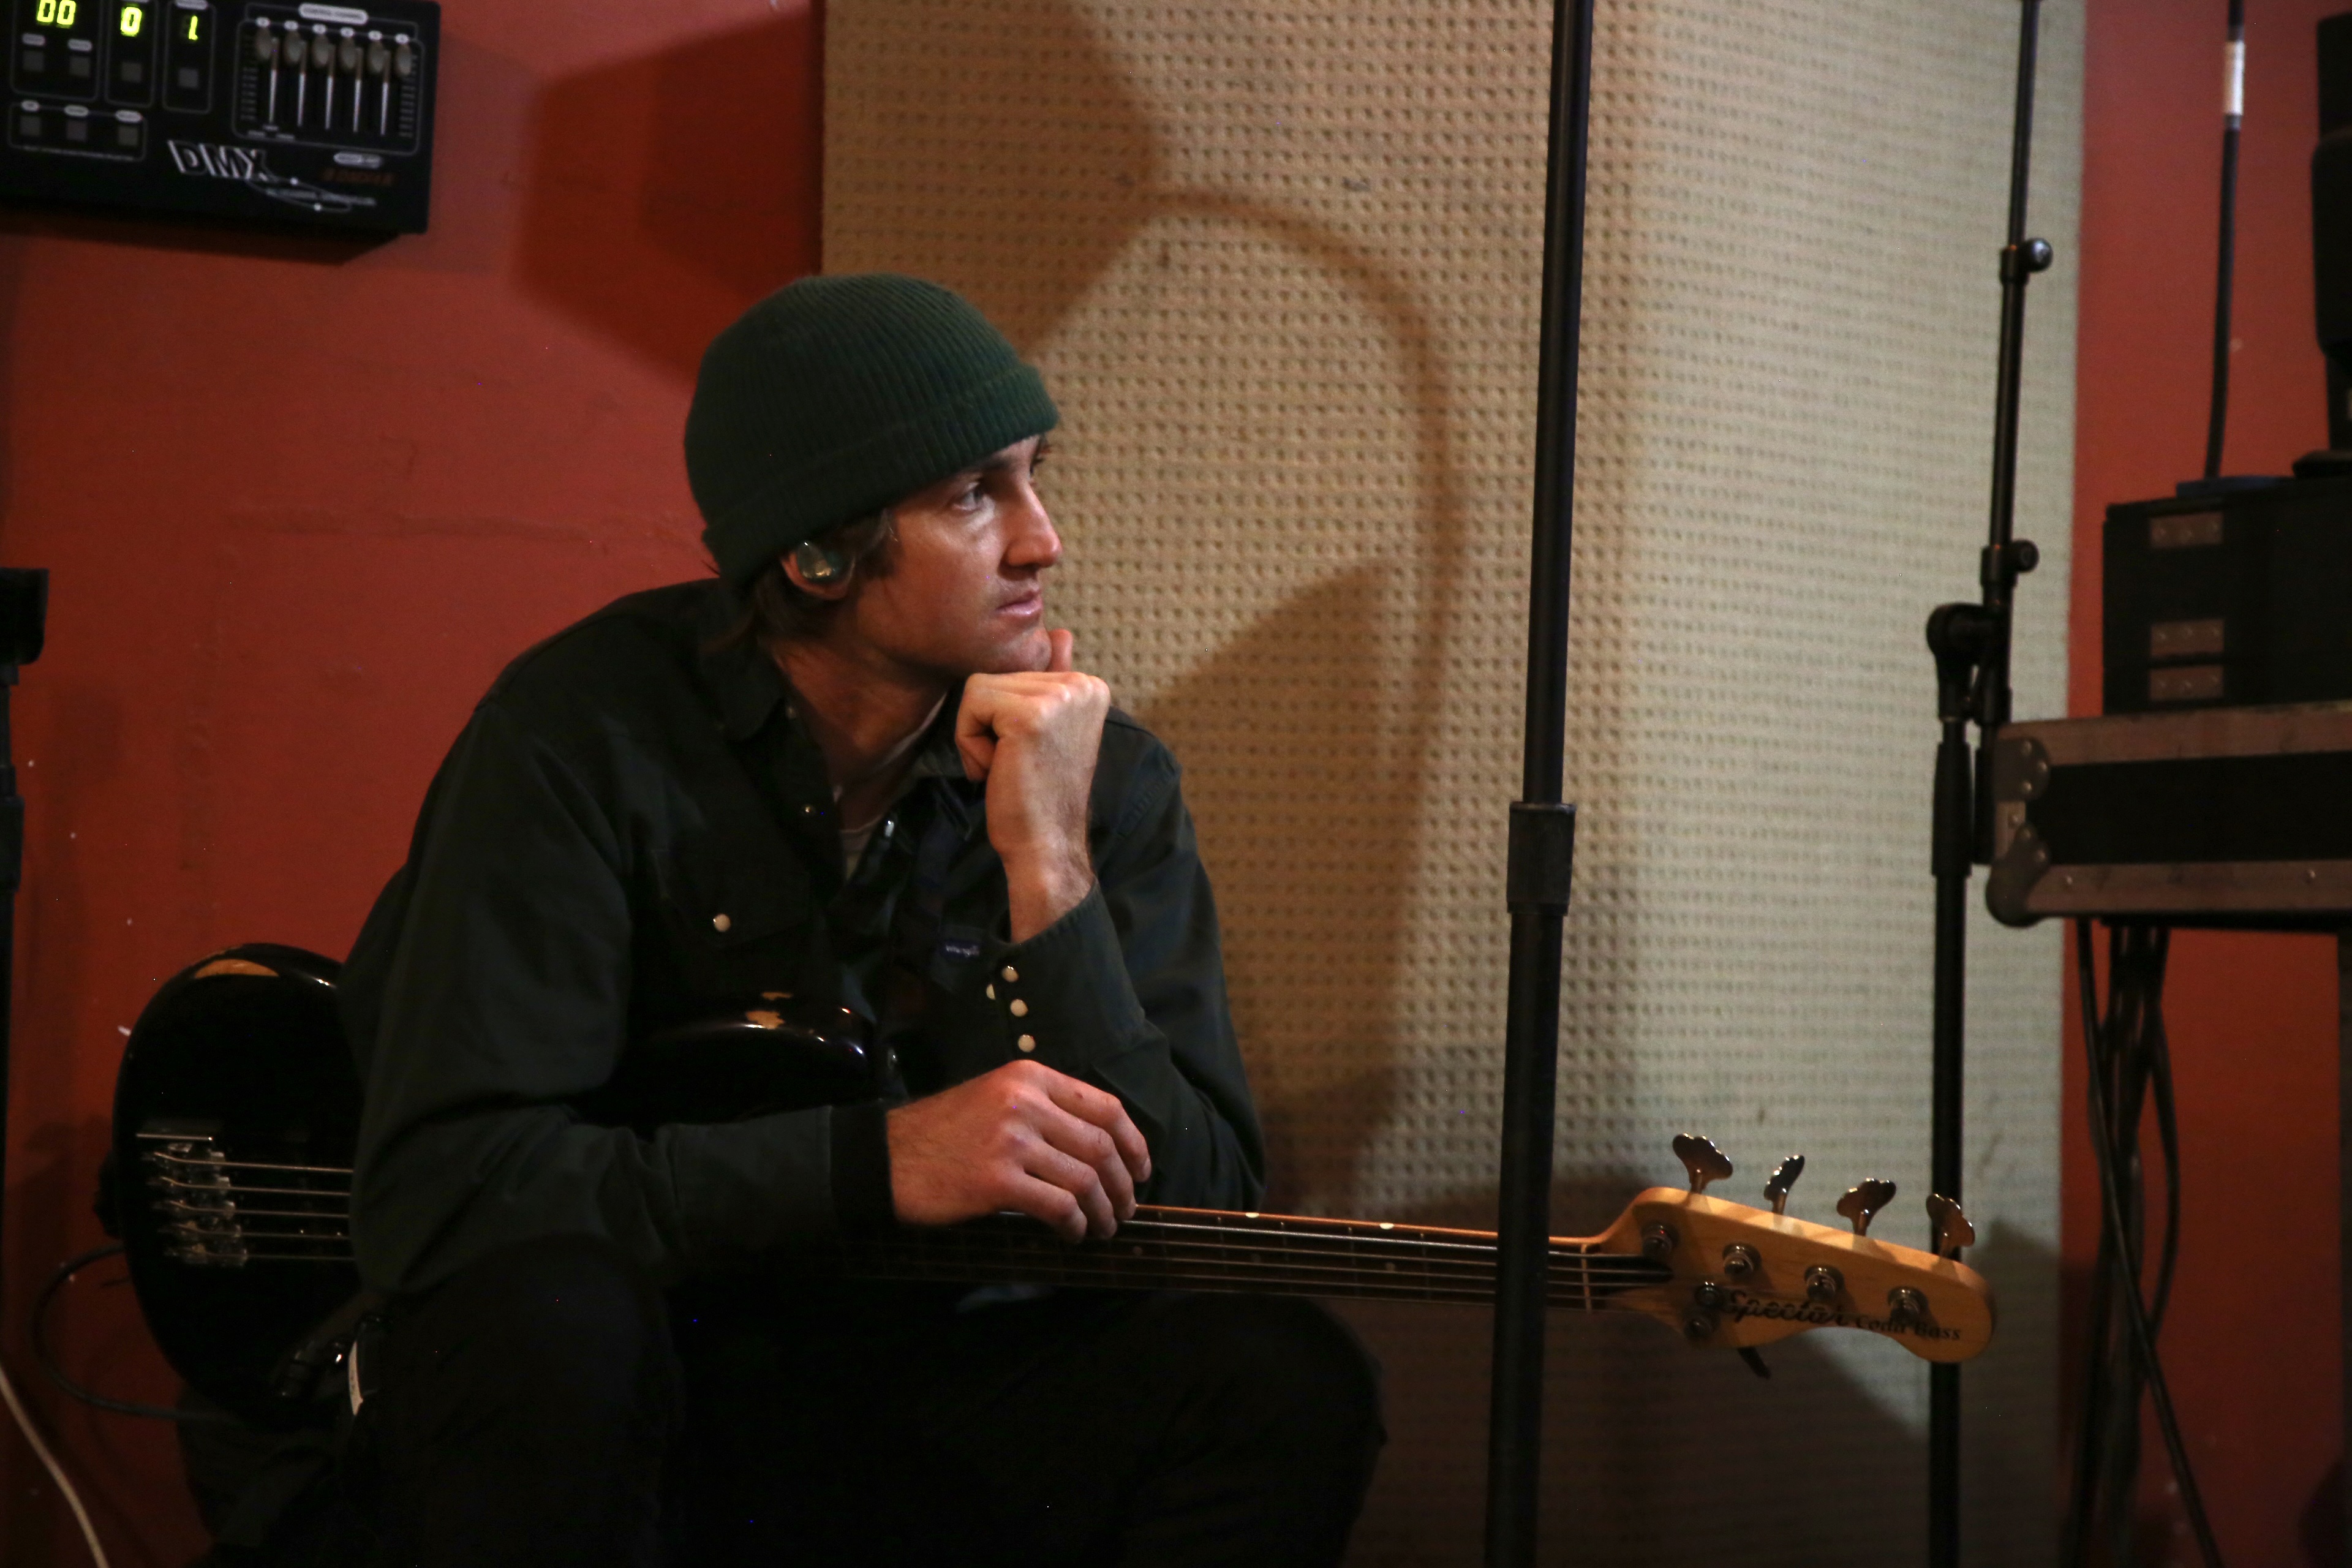 A man wearing a beanie sits on a couch holding a bass guitar, his hand resting under his chin